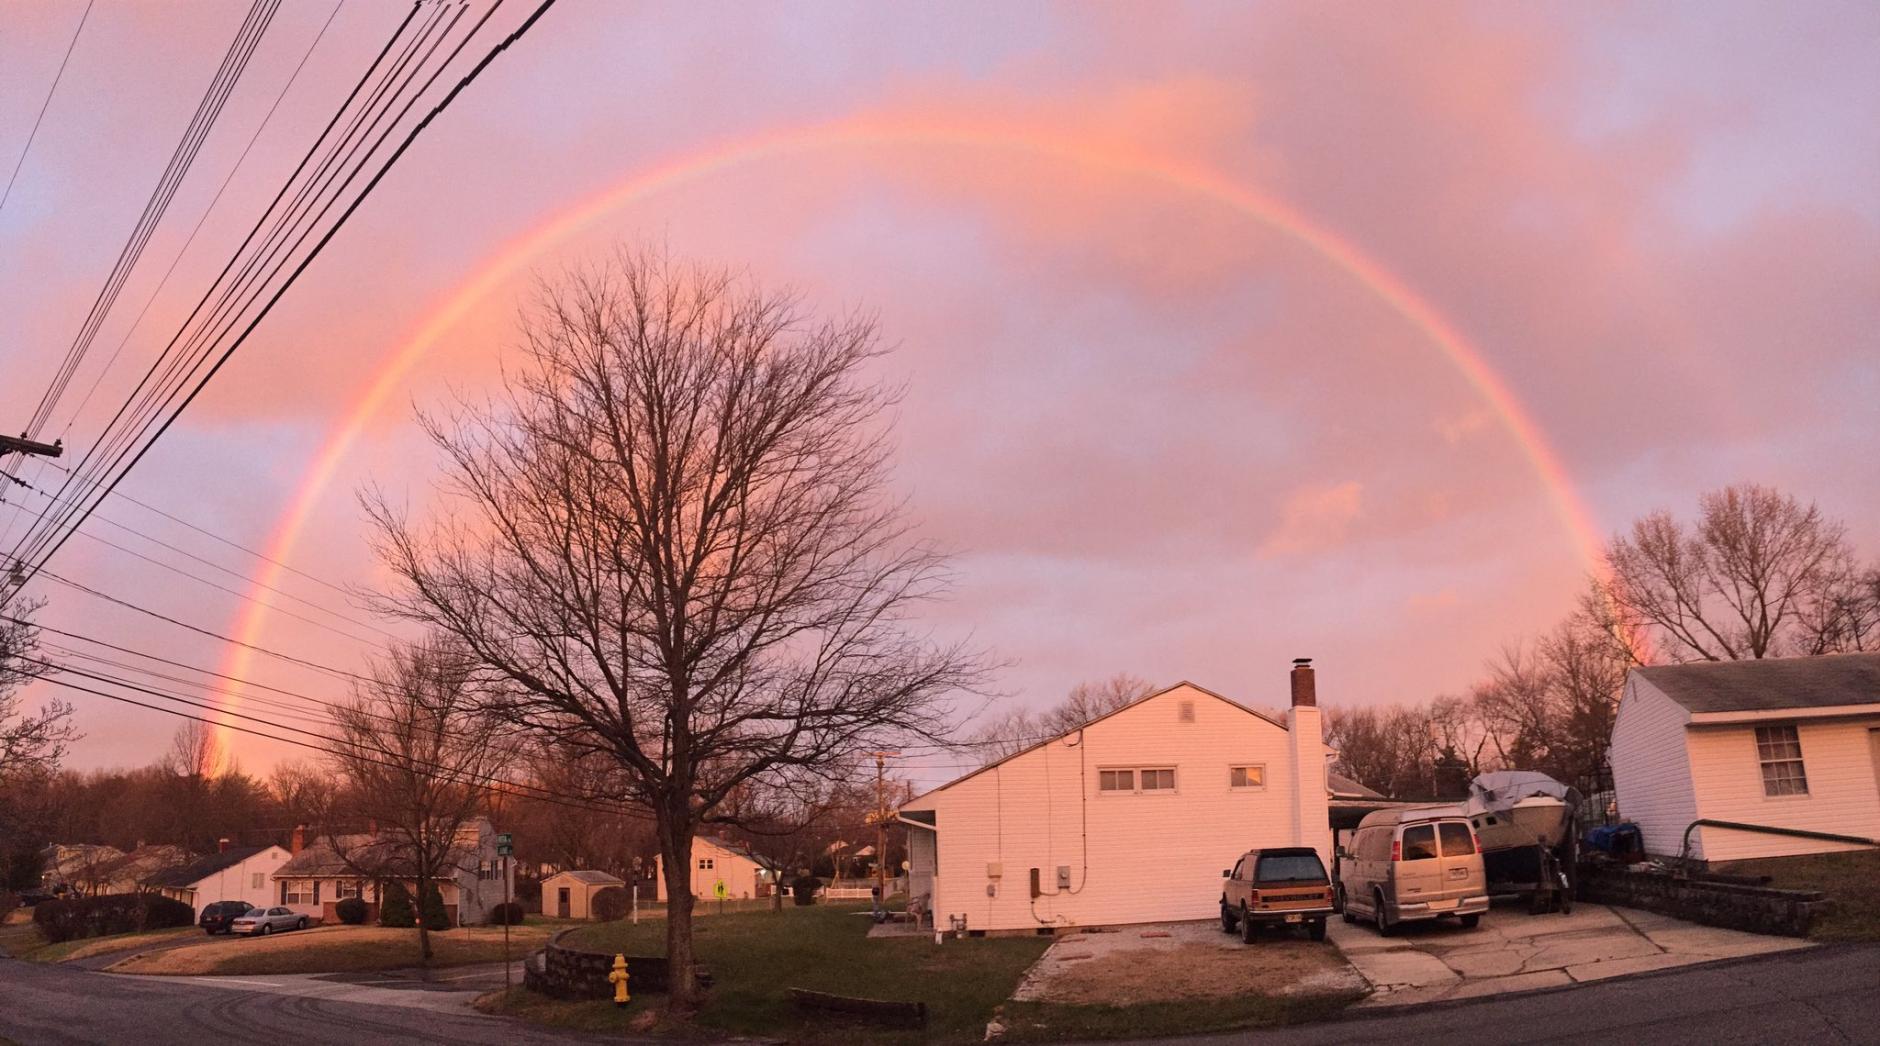 An early-morning rainbow in Odenton, Maryland. (Bryan Patrick via Twitter)